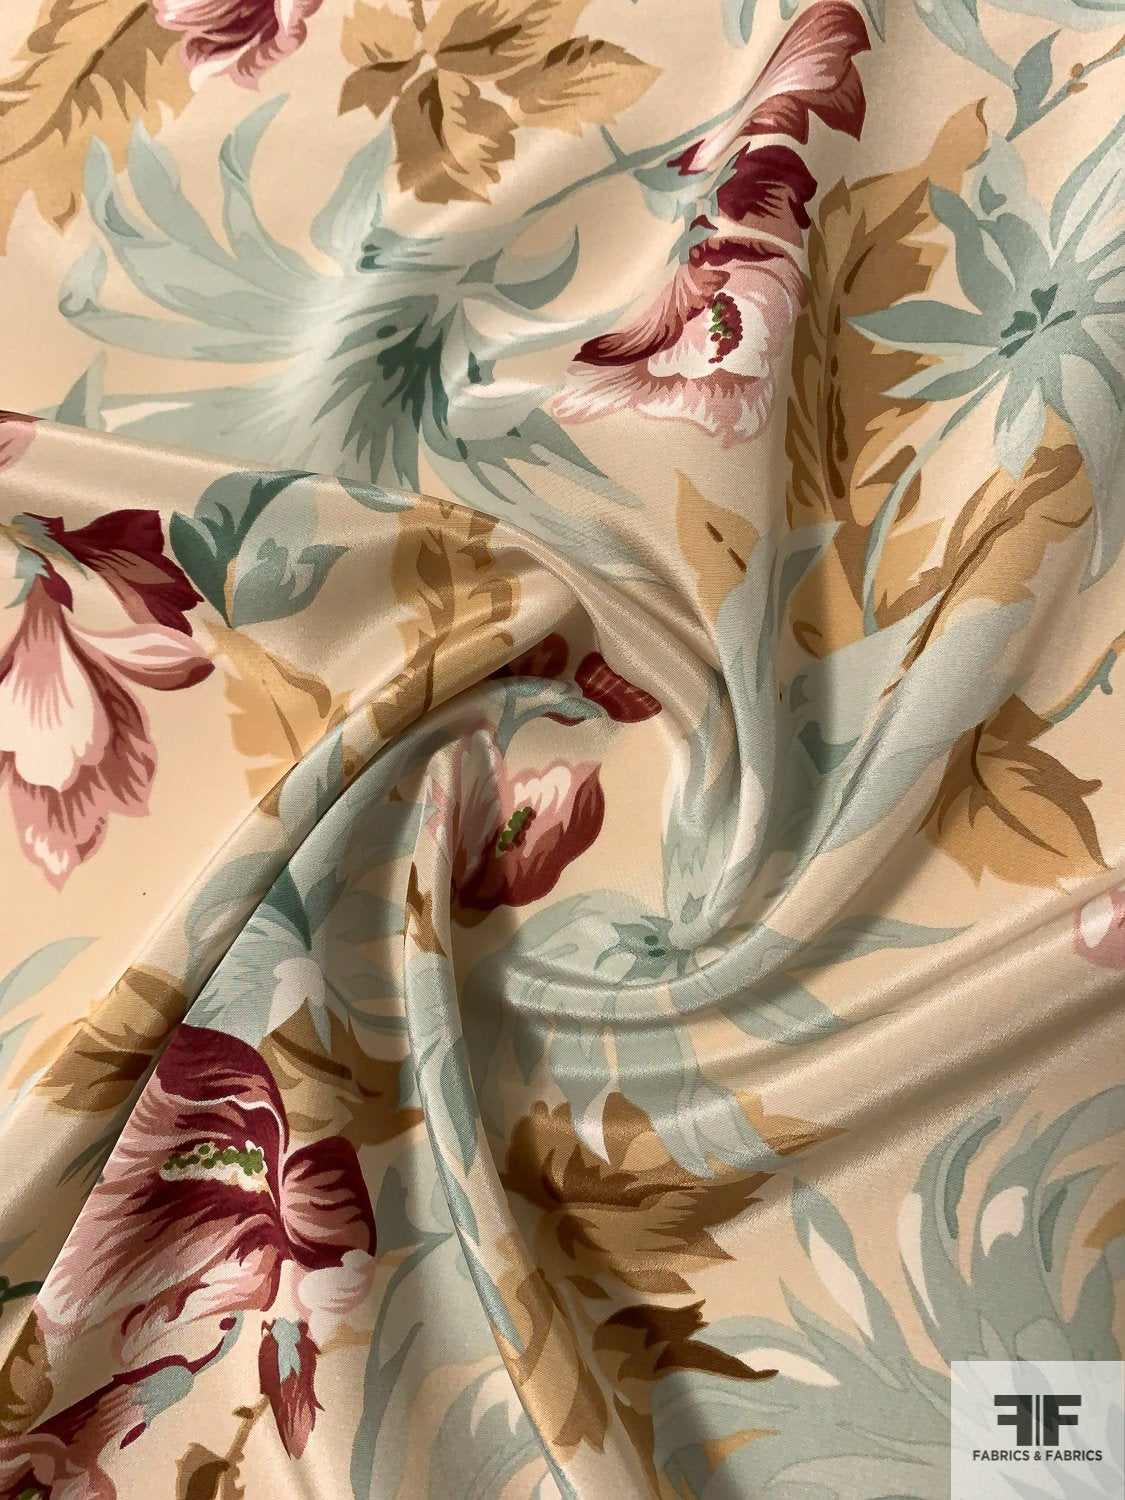 We have a large collection of print organza silk fabric that can